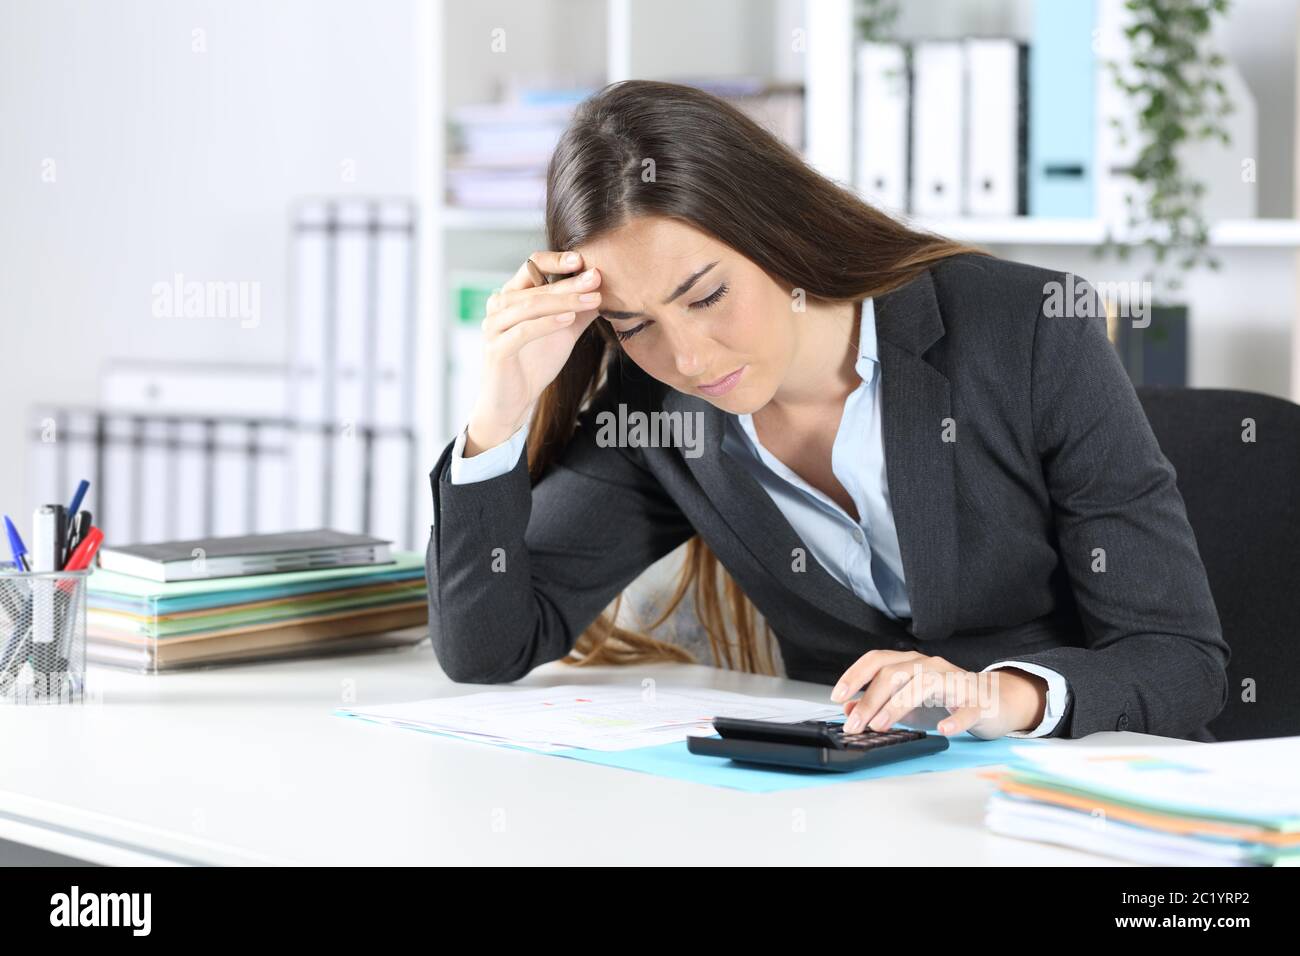 Worried bookkeeper woman checking calculator result sitting on a desk at office Stock Photo